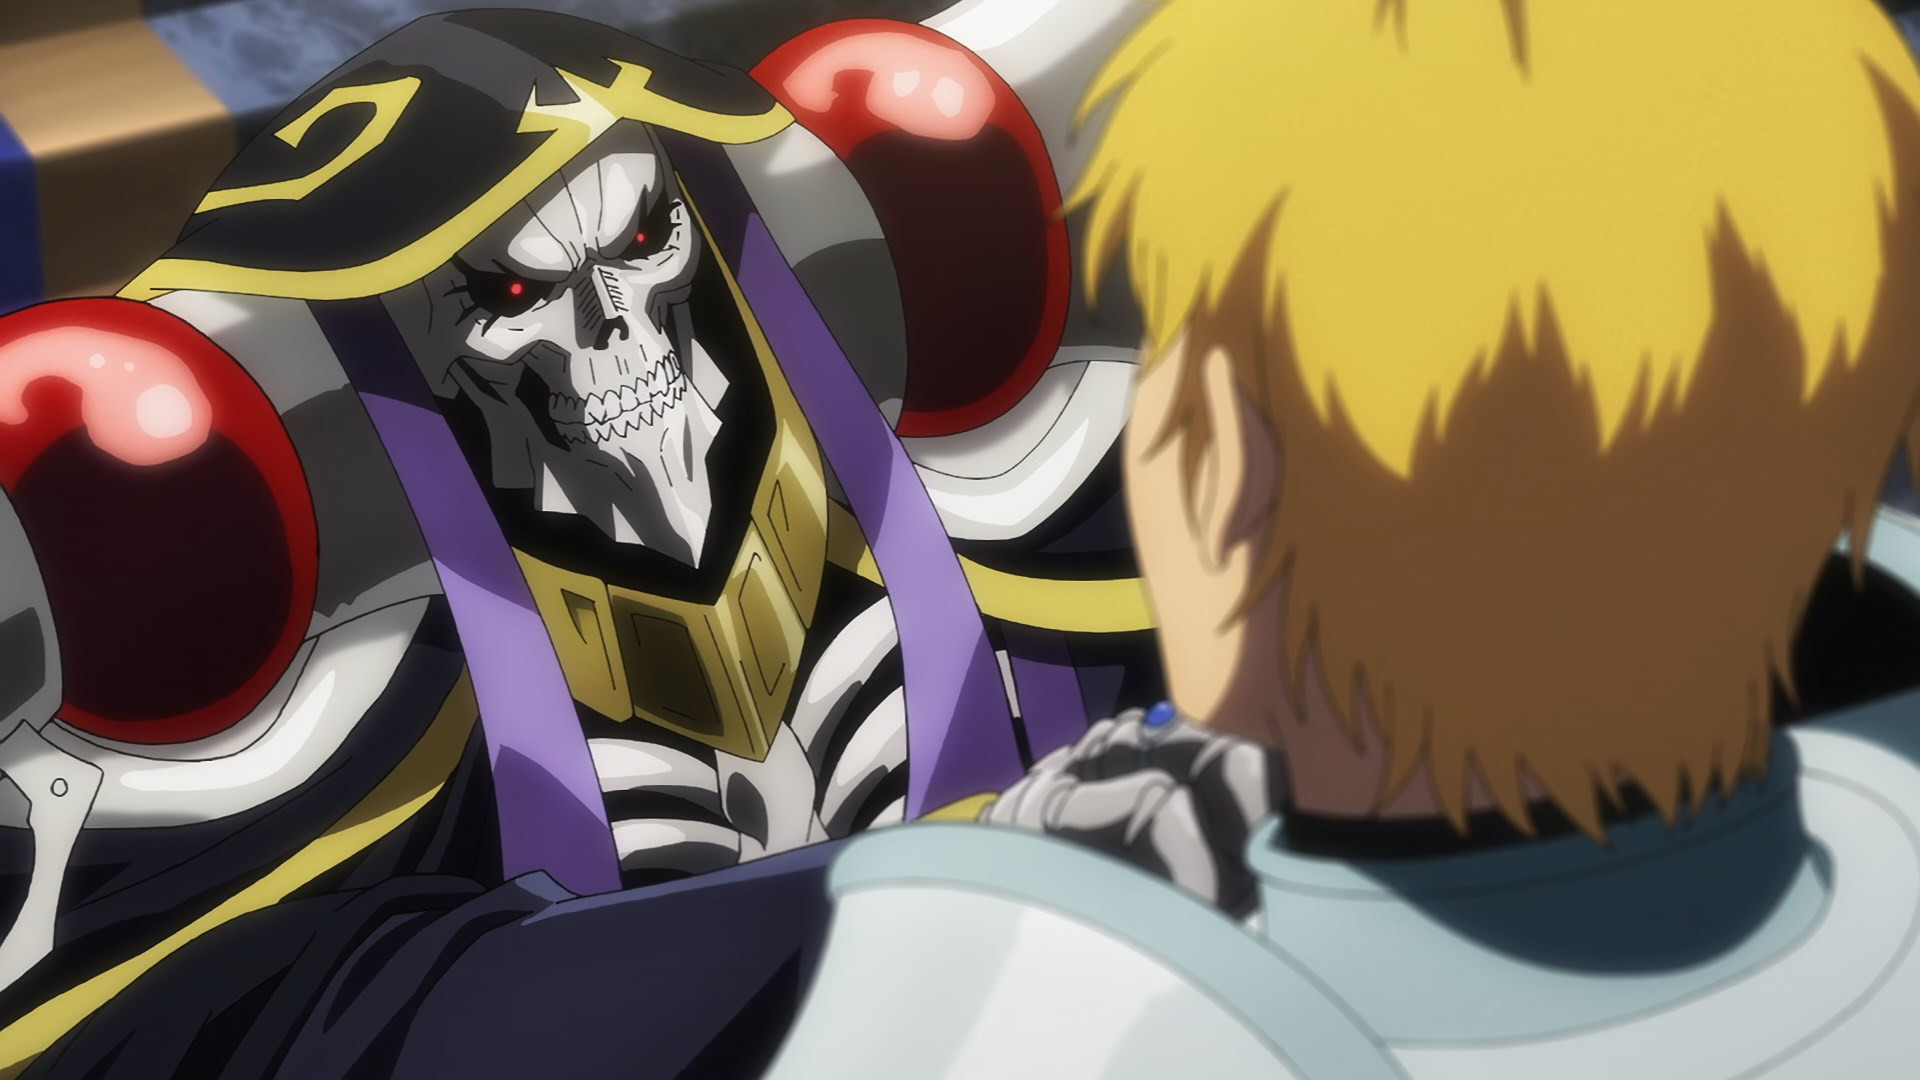 Overlord (Anime) Review - Marooners' Rock